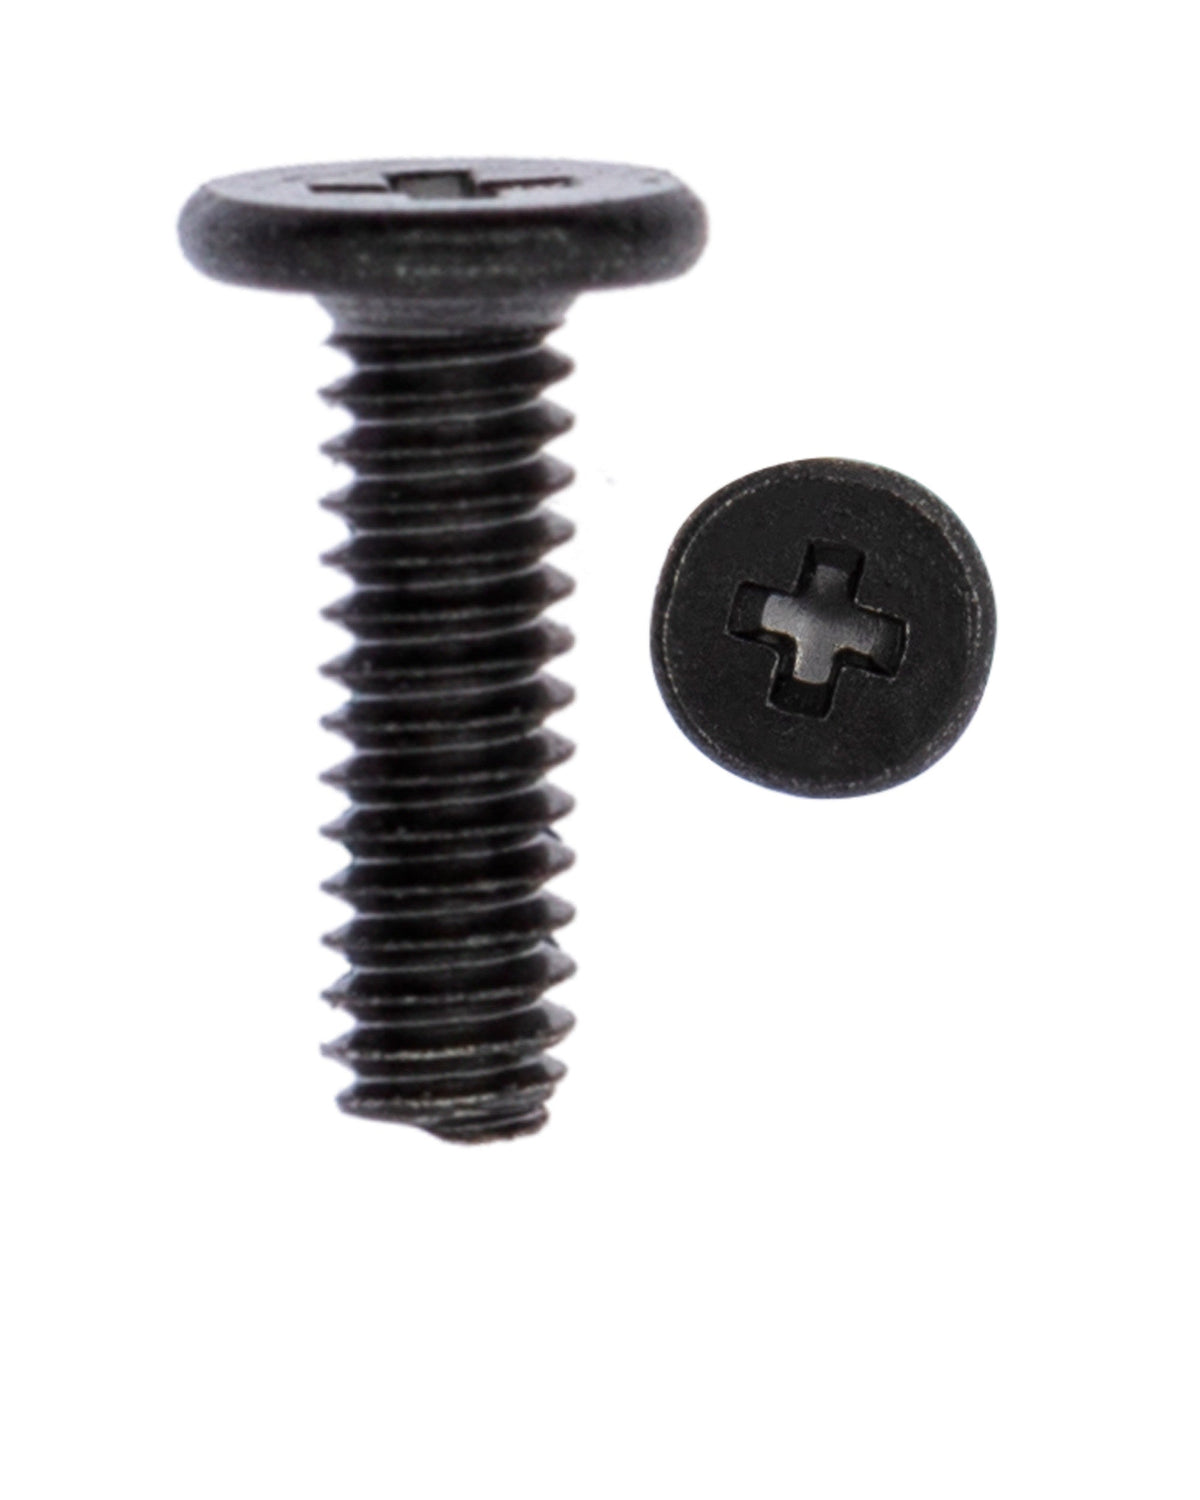 COMPLETE SCREW SET COMPATIBLE FOR IPAD AIR 4/5